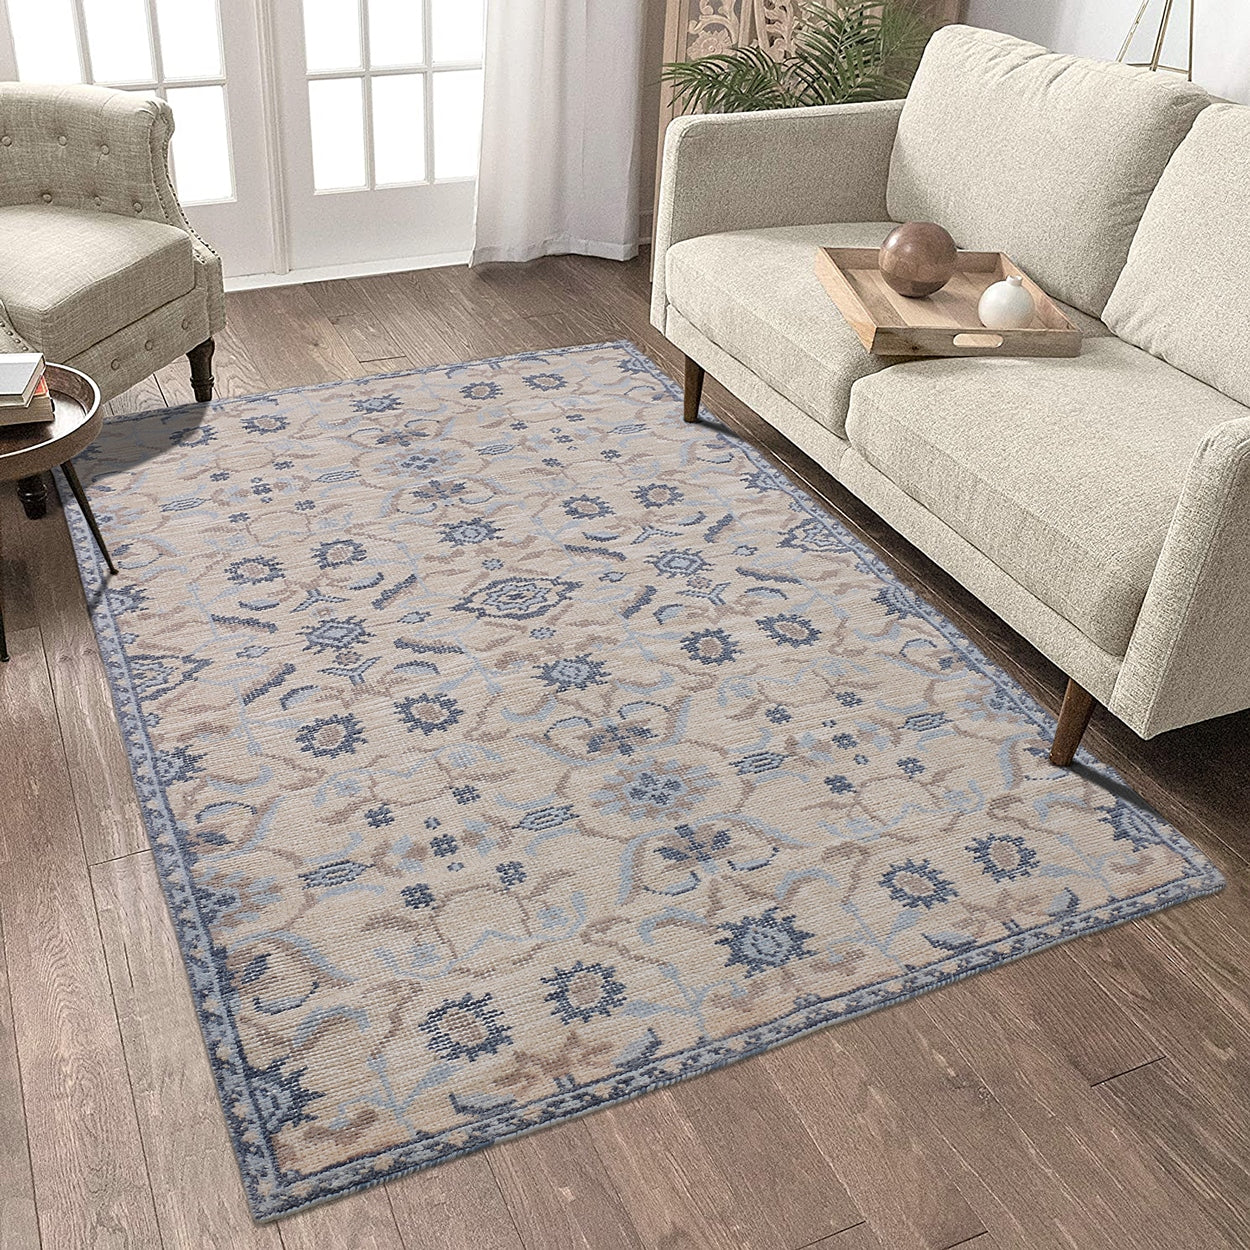 Blue Beige and Natural Hand Knotted Wool Rug - 5'x8'